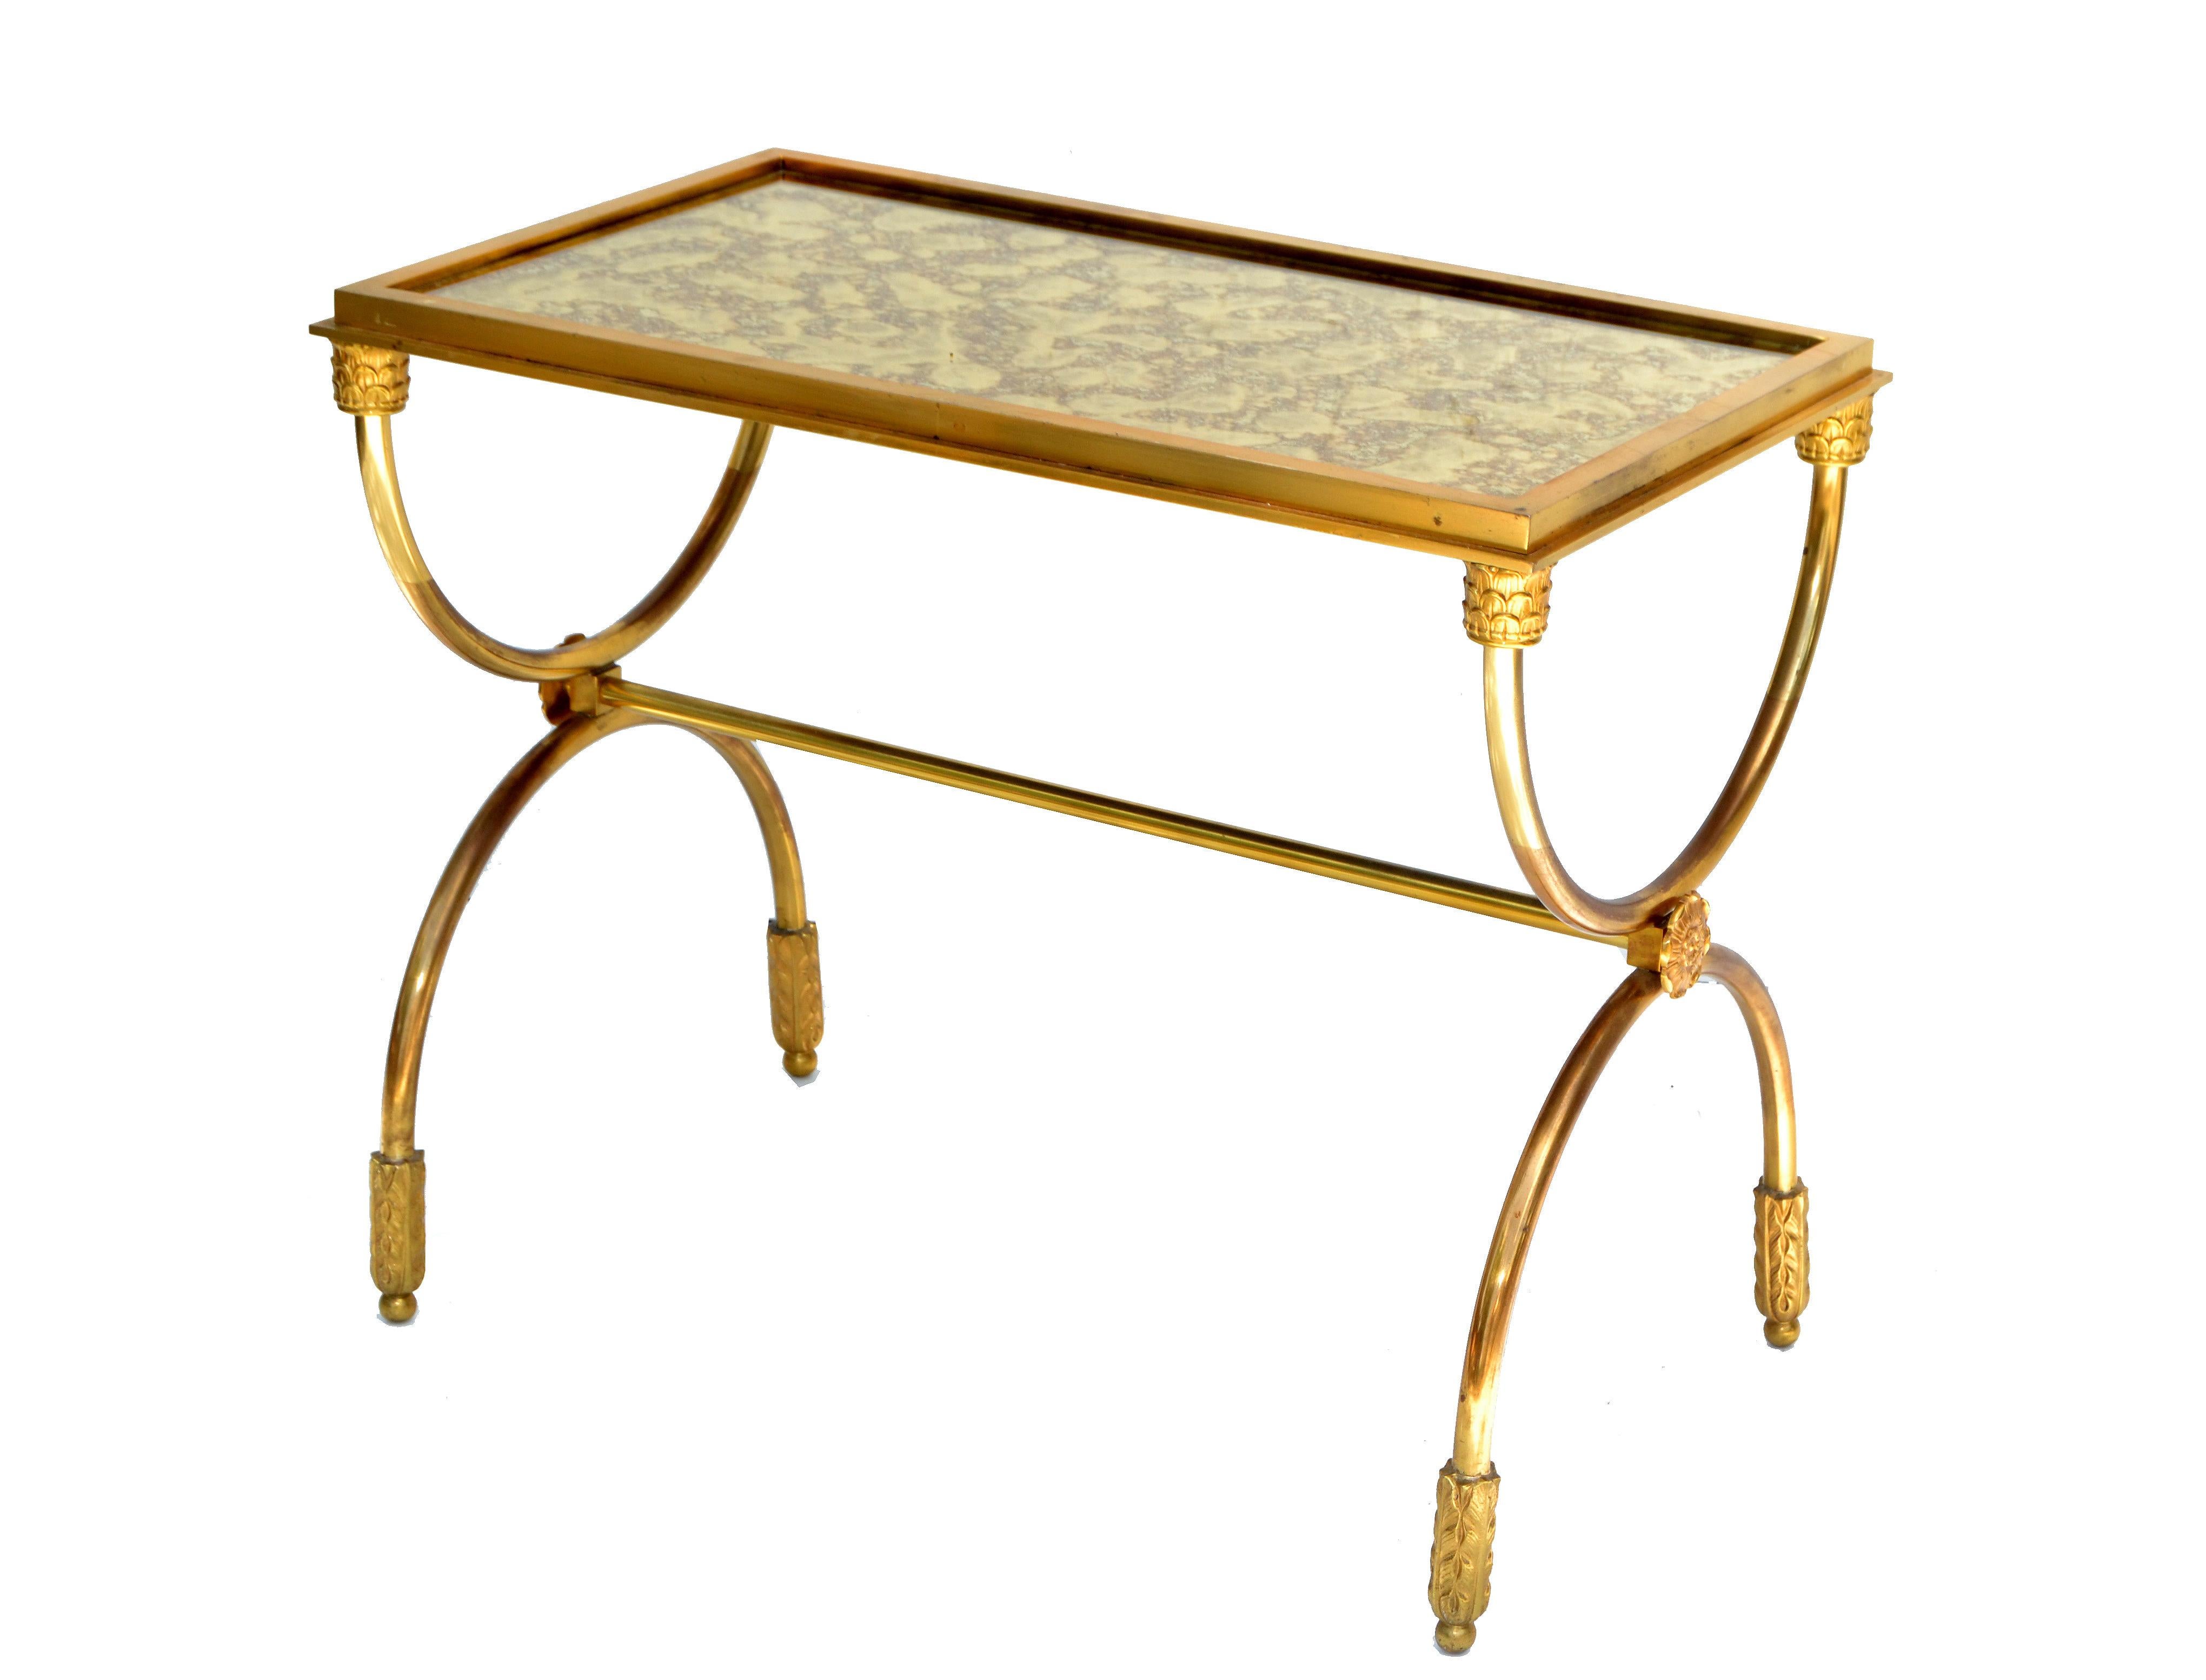 Superb and rare Raymond Subes attributed side table with brass ornaments, semi circular bronze base and a mirrored glass top.
French neoclassical design in brass details and a heavy crafted bronze base.
Glass top measures: 21.75 x 11.75 inches.